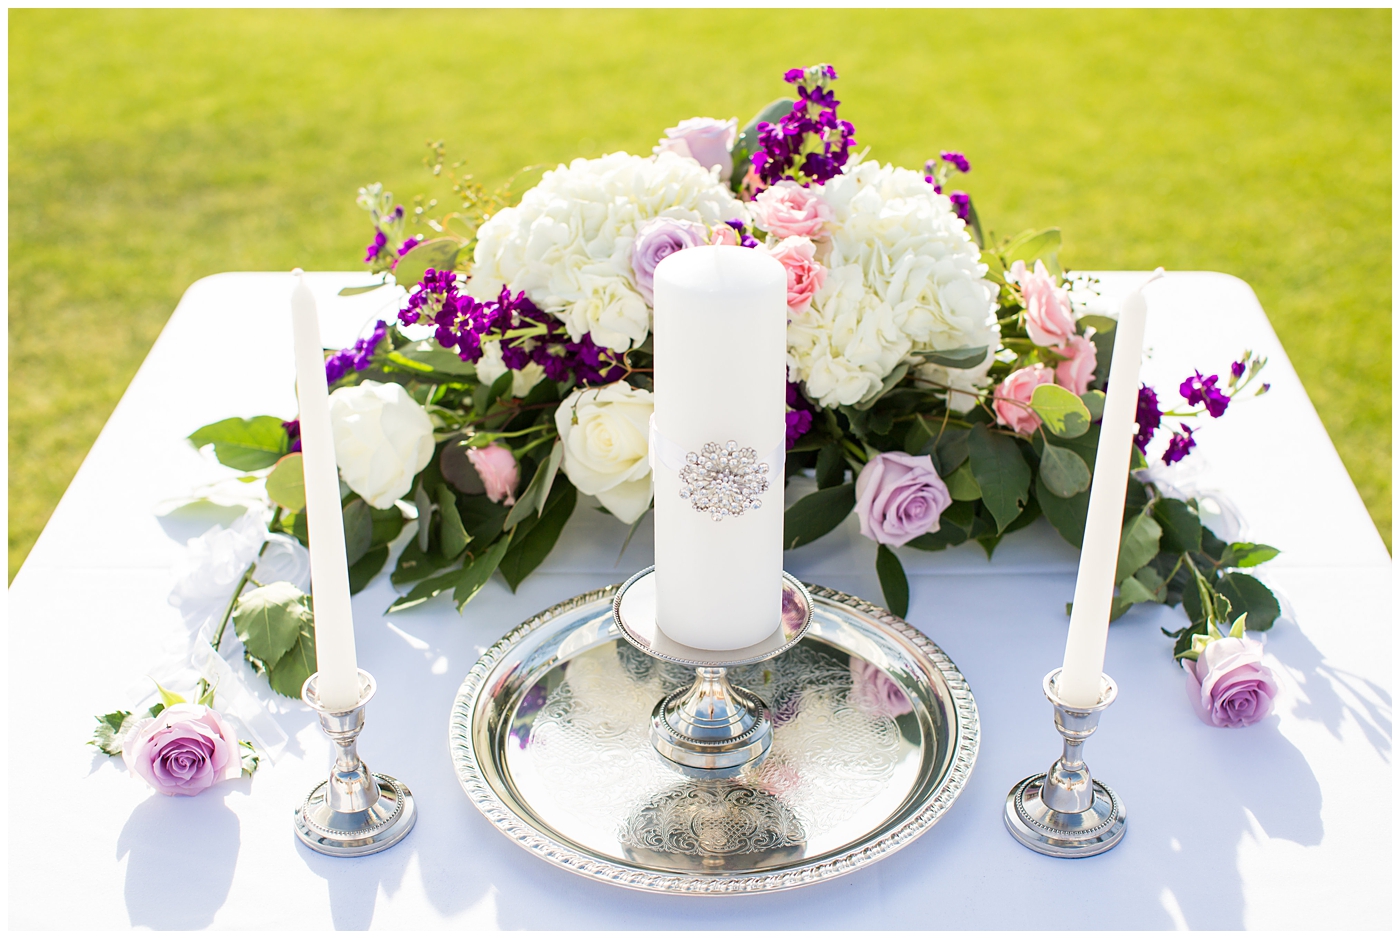 unity candle at golf course outdoor wedding ceremony with white and purple flowers